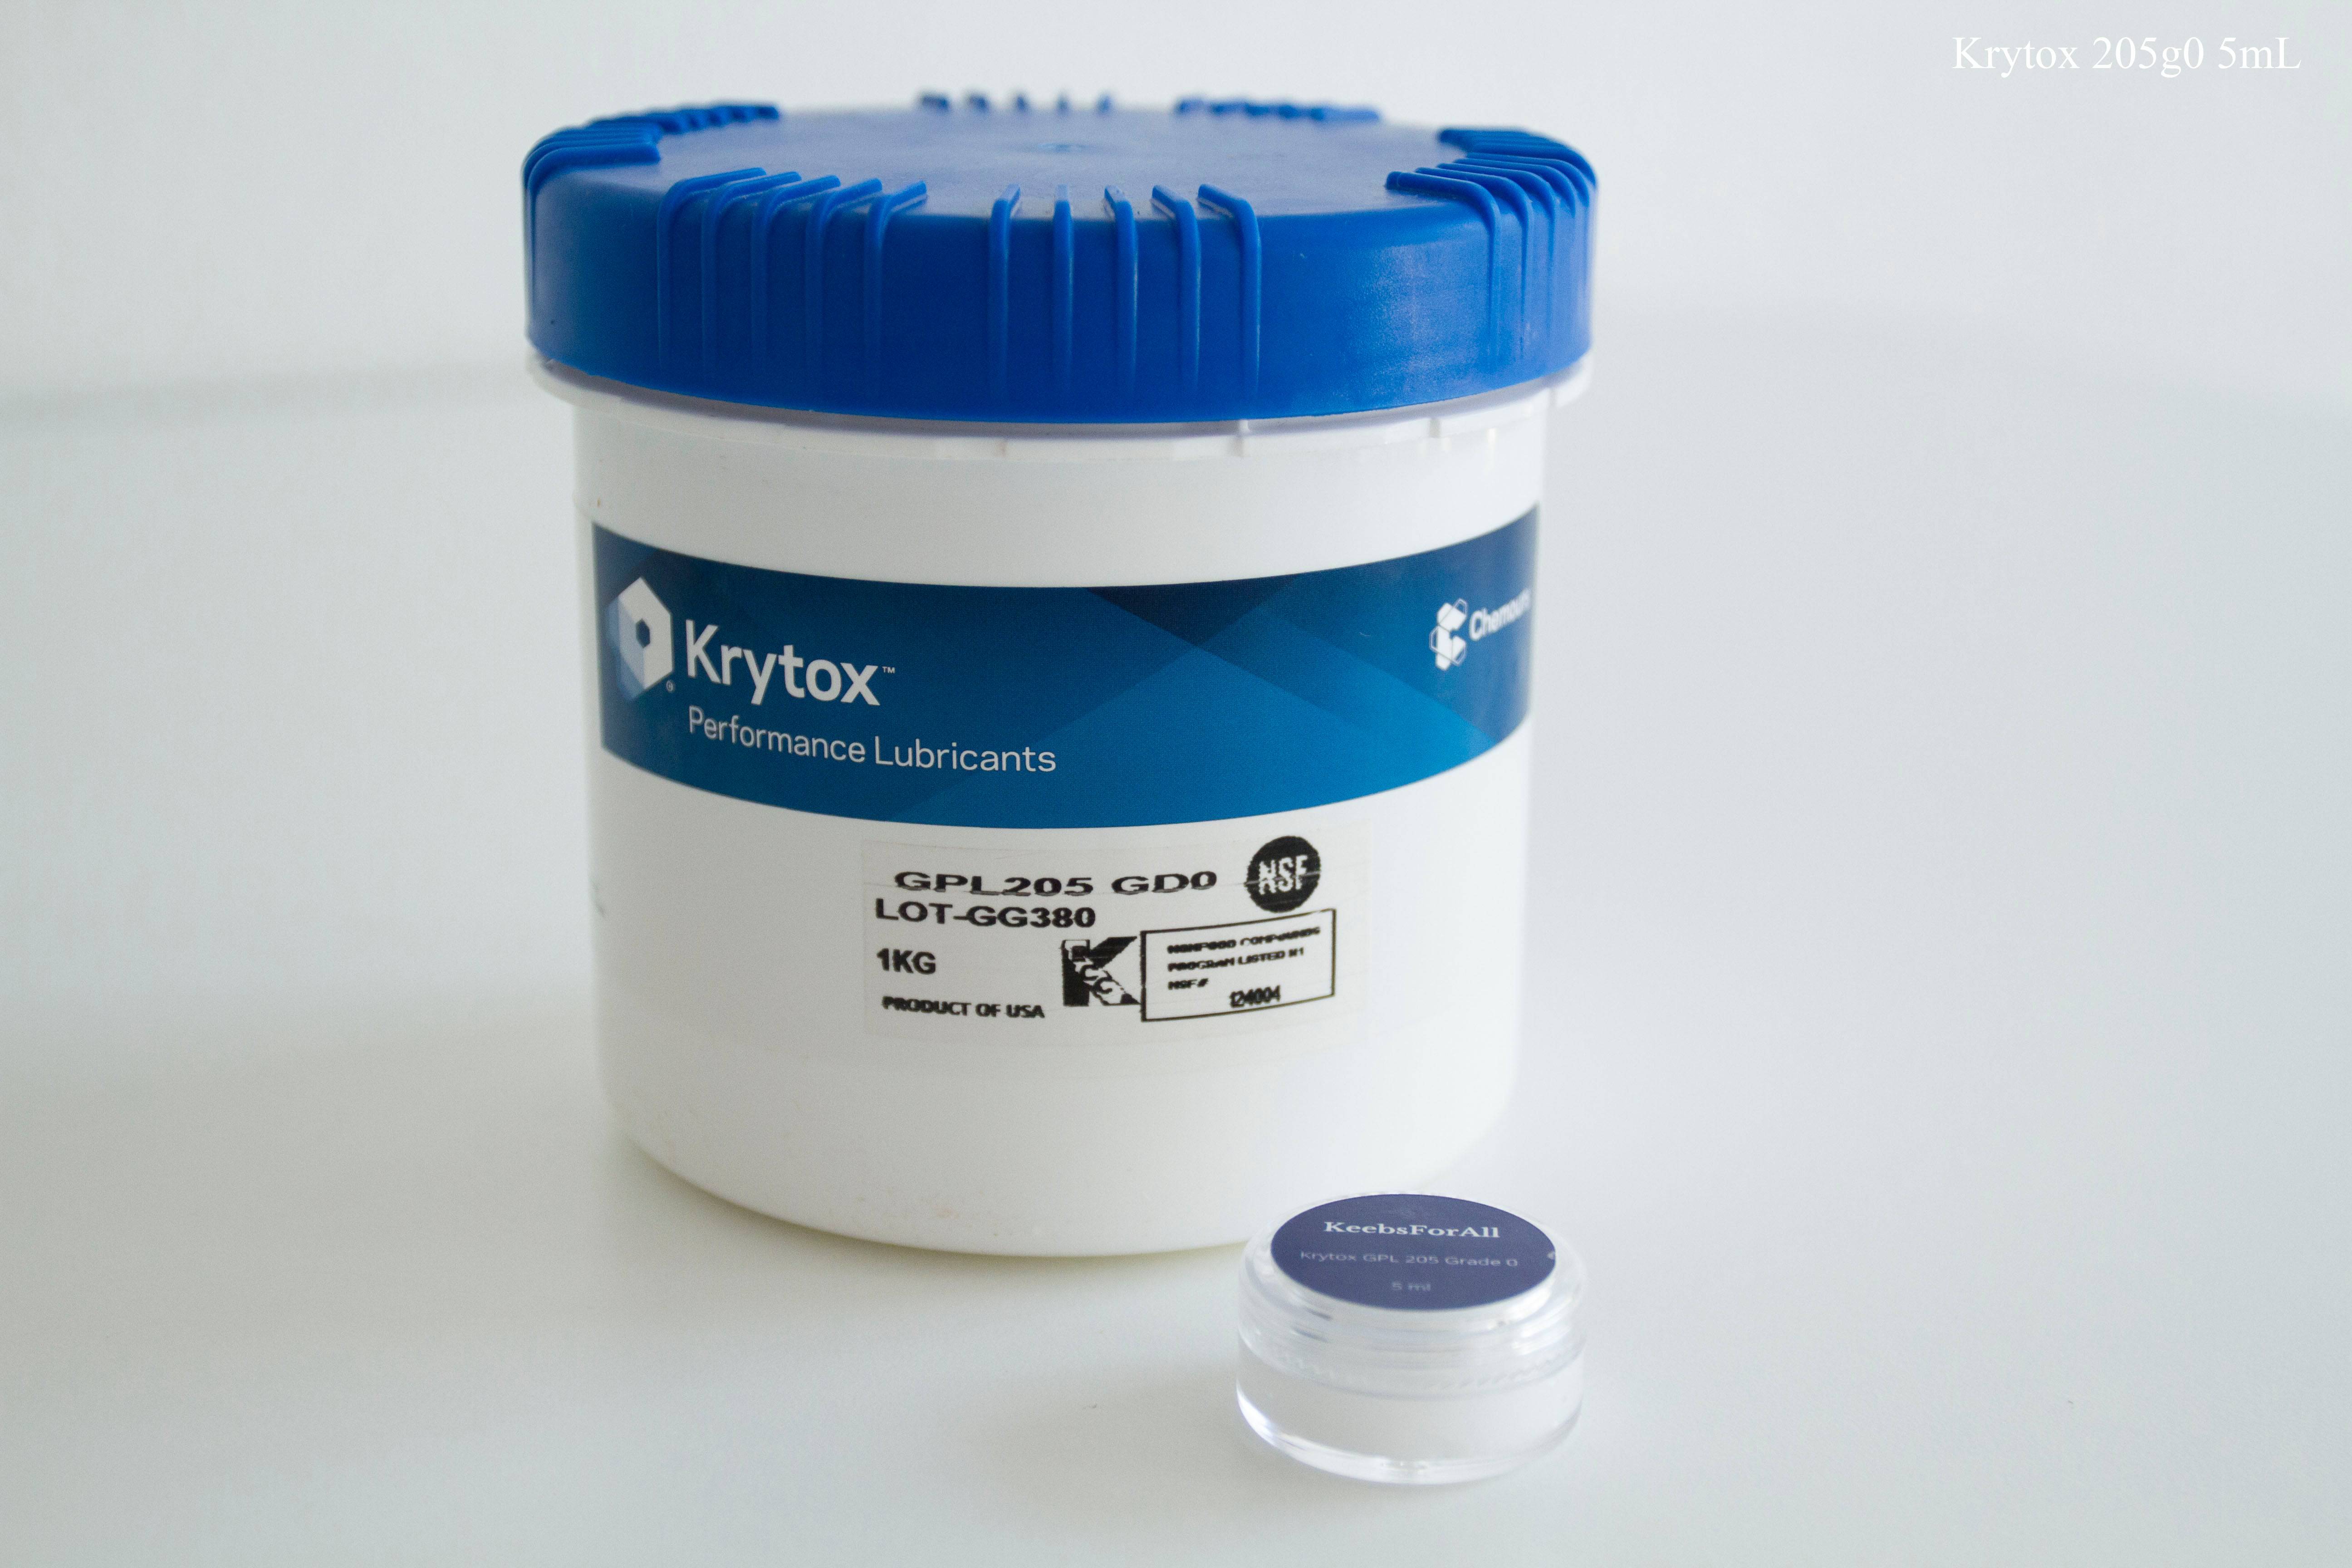 Krytox 205g0 5mL. With this amount, it's enough to lube approximately 500 switches lightly. Less is always more in the lubing world.